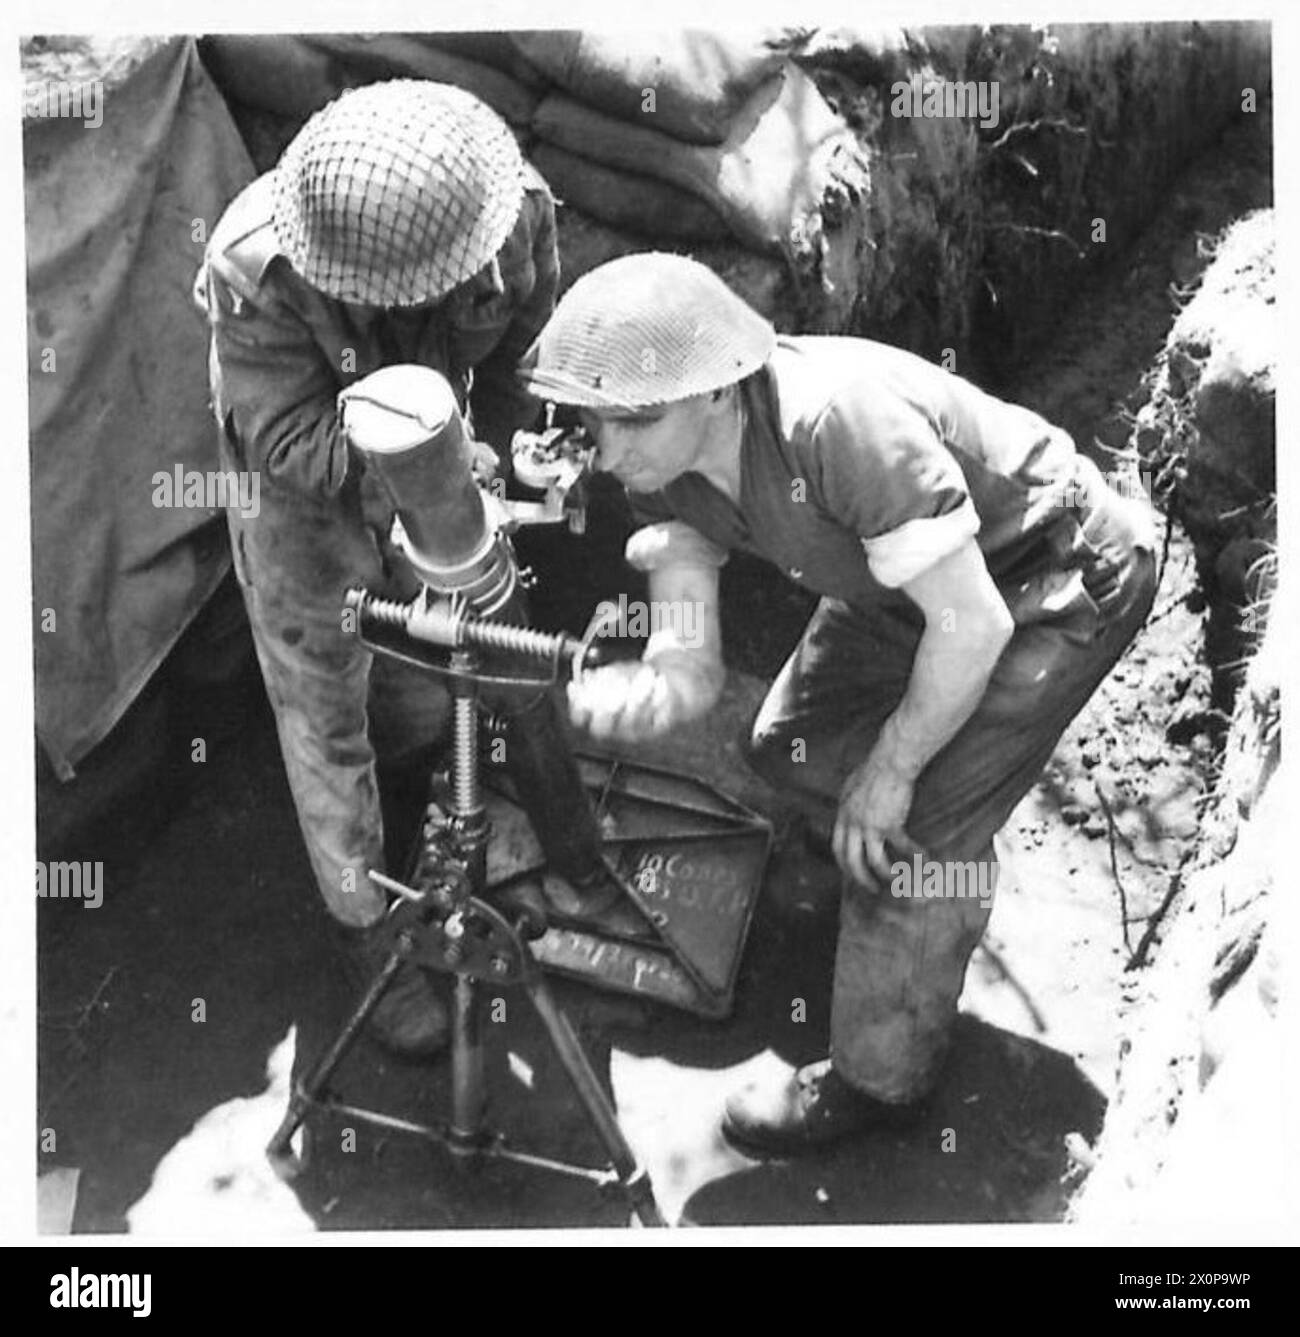 FIFTH ARMY : ANZIO BRIDGEHEAD (VARIOUS) - Tpr. H. Rigby (left) of 124 Grantham Road, Manor Park, London, E.12 and Tpr. J. Spearing of 53 Charlton Vale, Kilburn, London, N.W.6 laying a mortar. Photographic negative , British Army Stock Photo